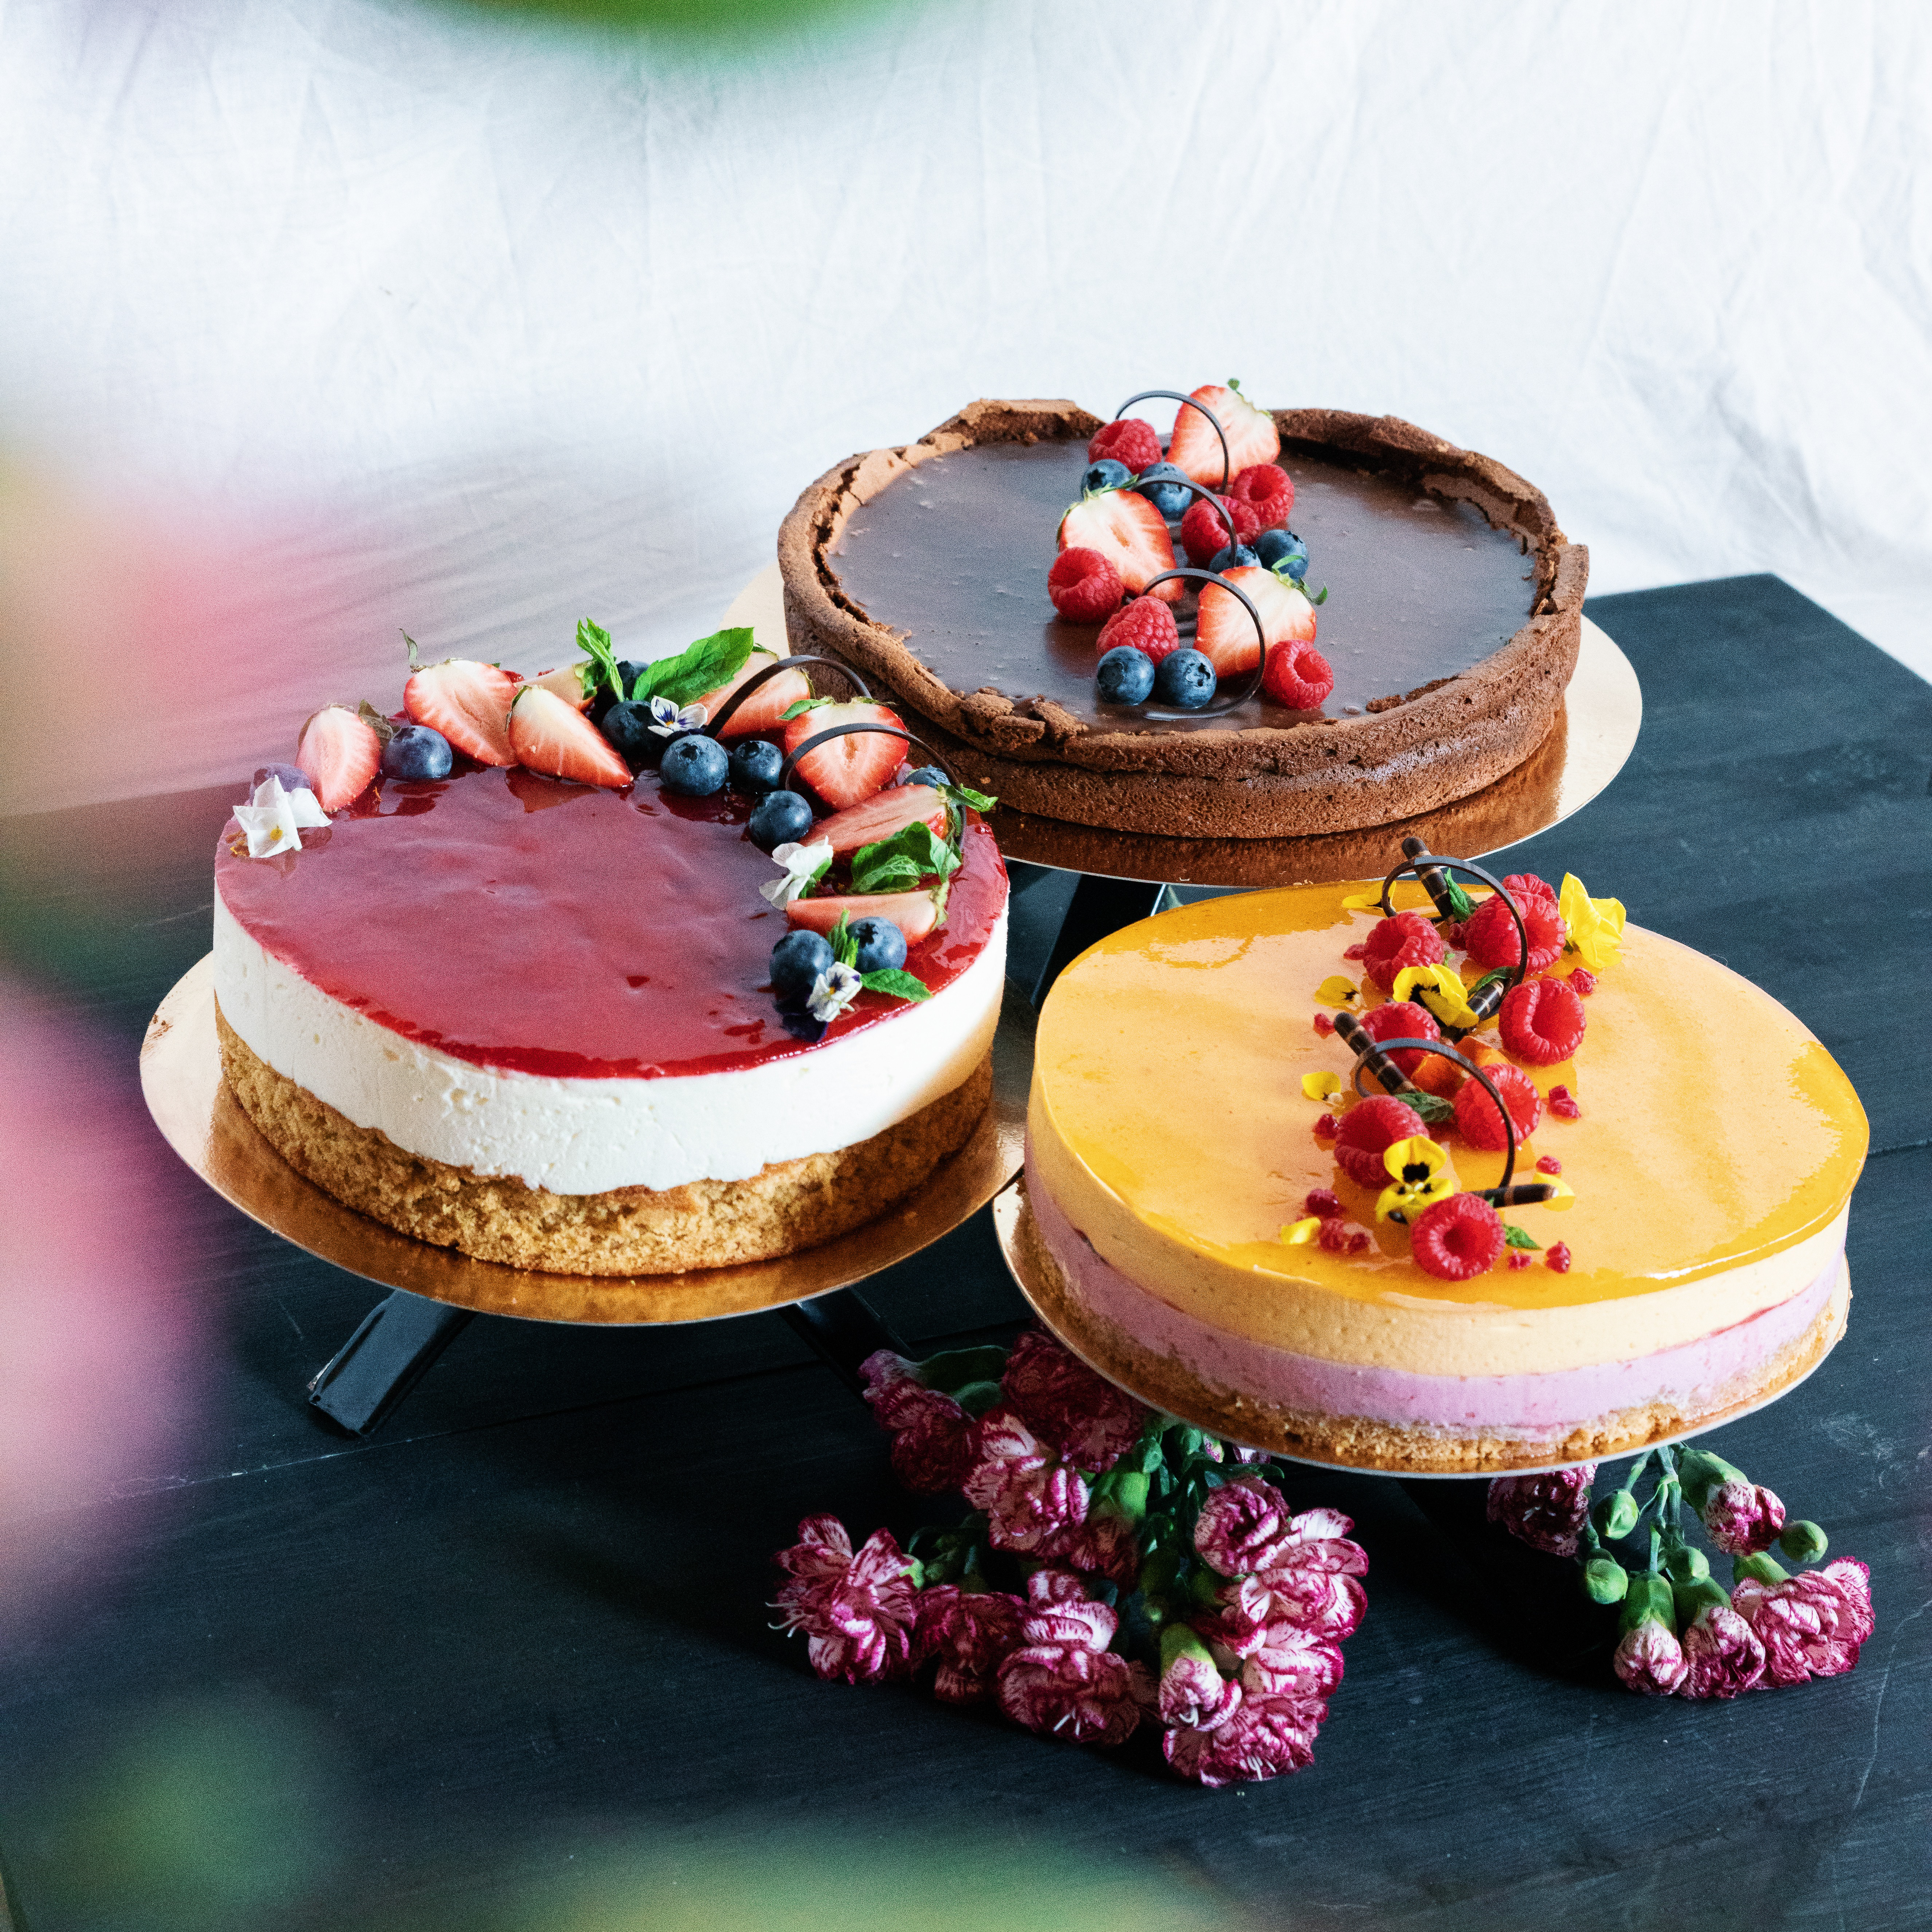 Celebrate Mother's Day with Cakes from Semma Bakery!